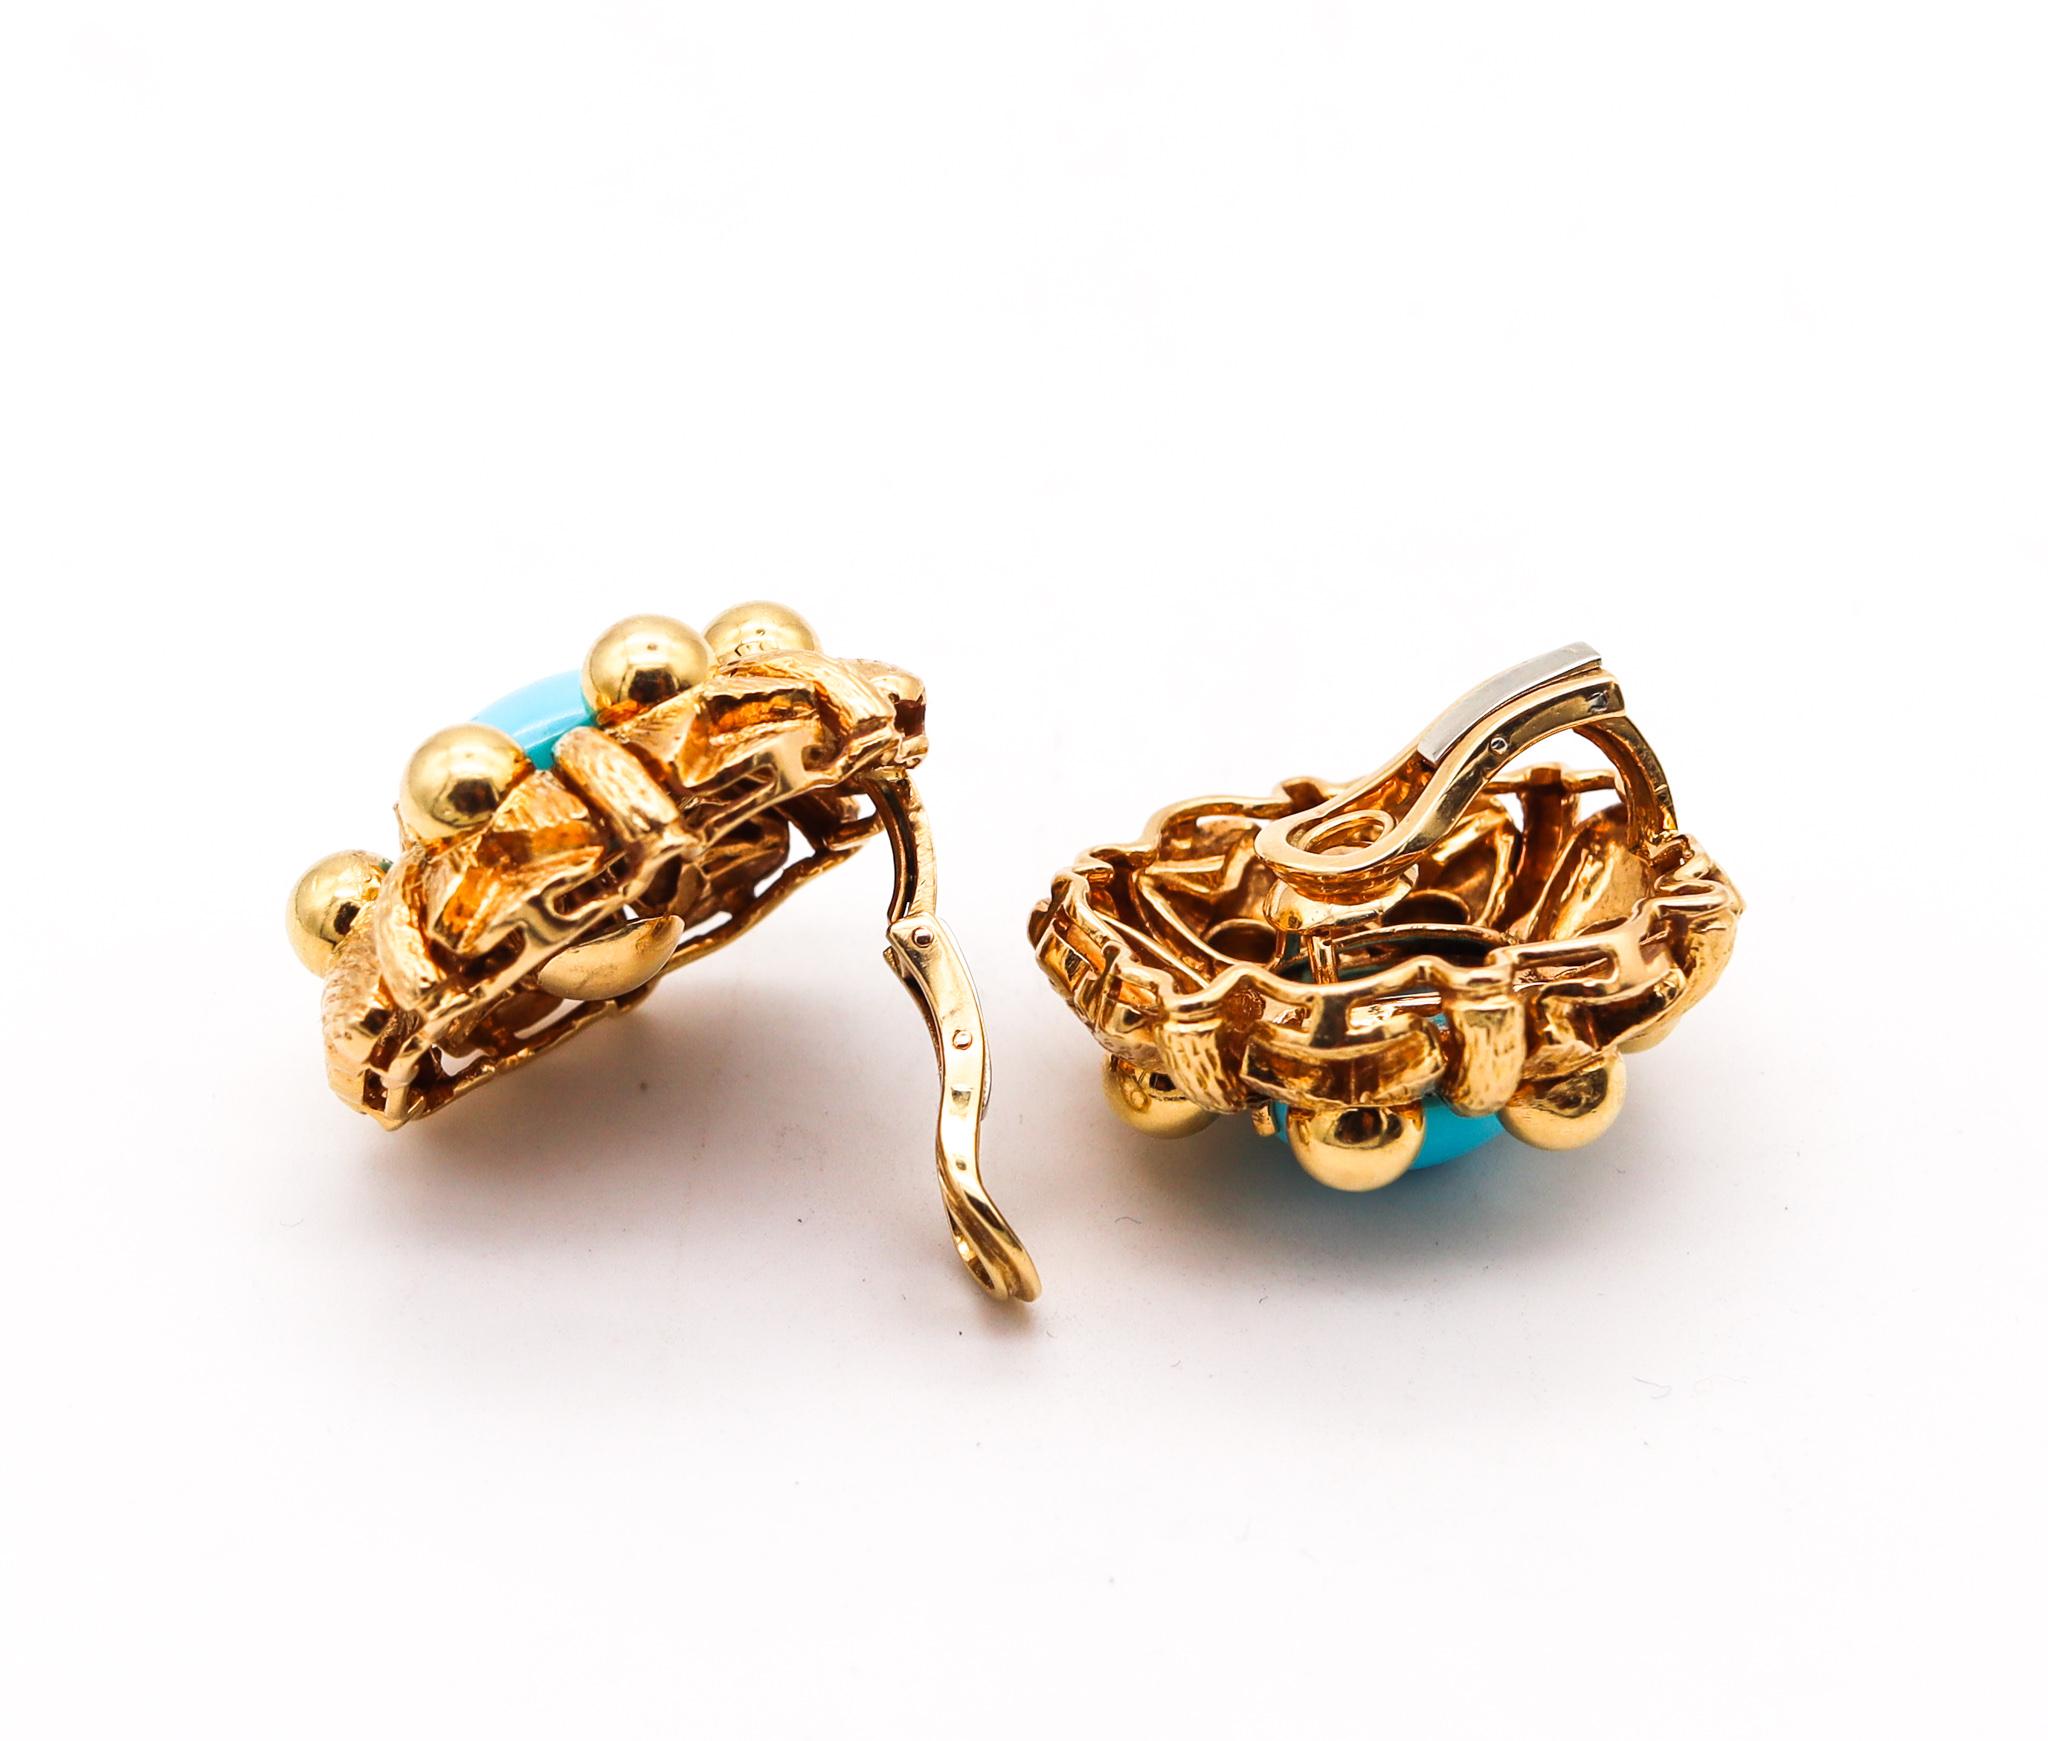 Modernist Mid Century 1960 Cocktail Earrings In 18Kt Gold With Sleeping Beauty Turquoises